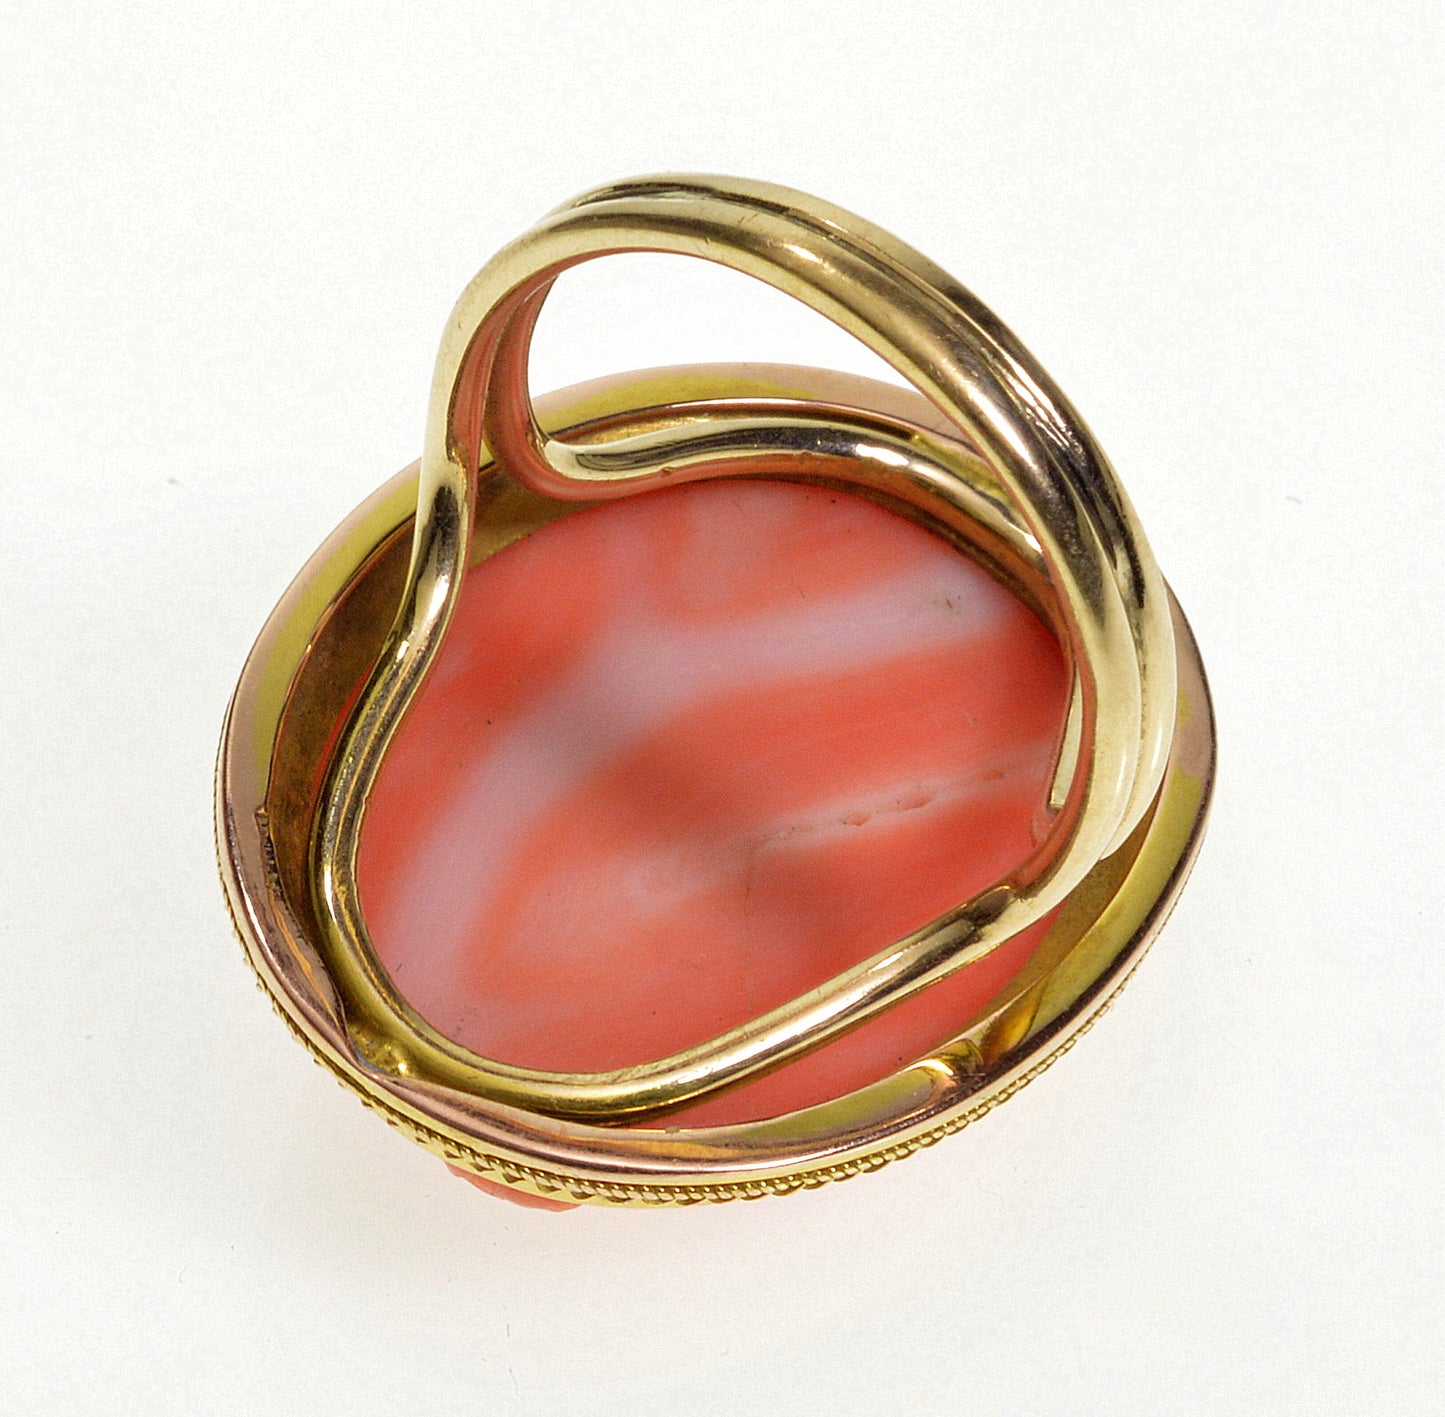 Antique Victorian 14K Gold Salmon Coral Cameo Ring Size 5 3/4 C.1890